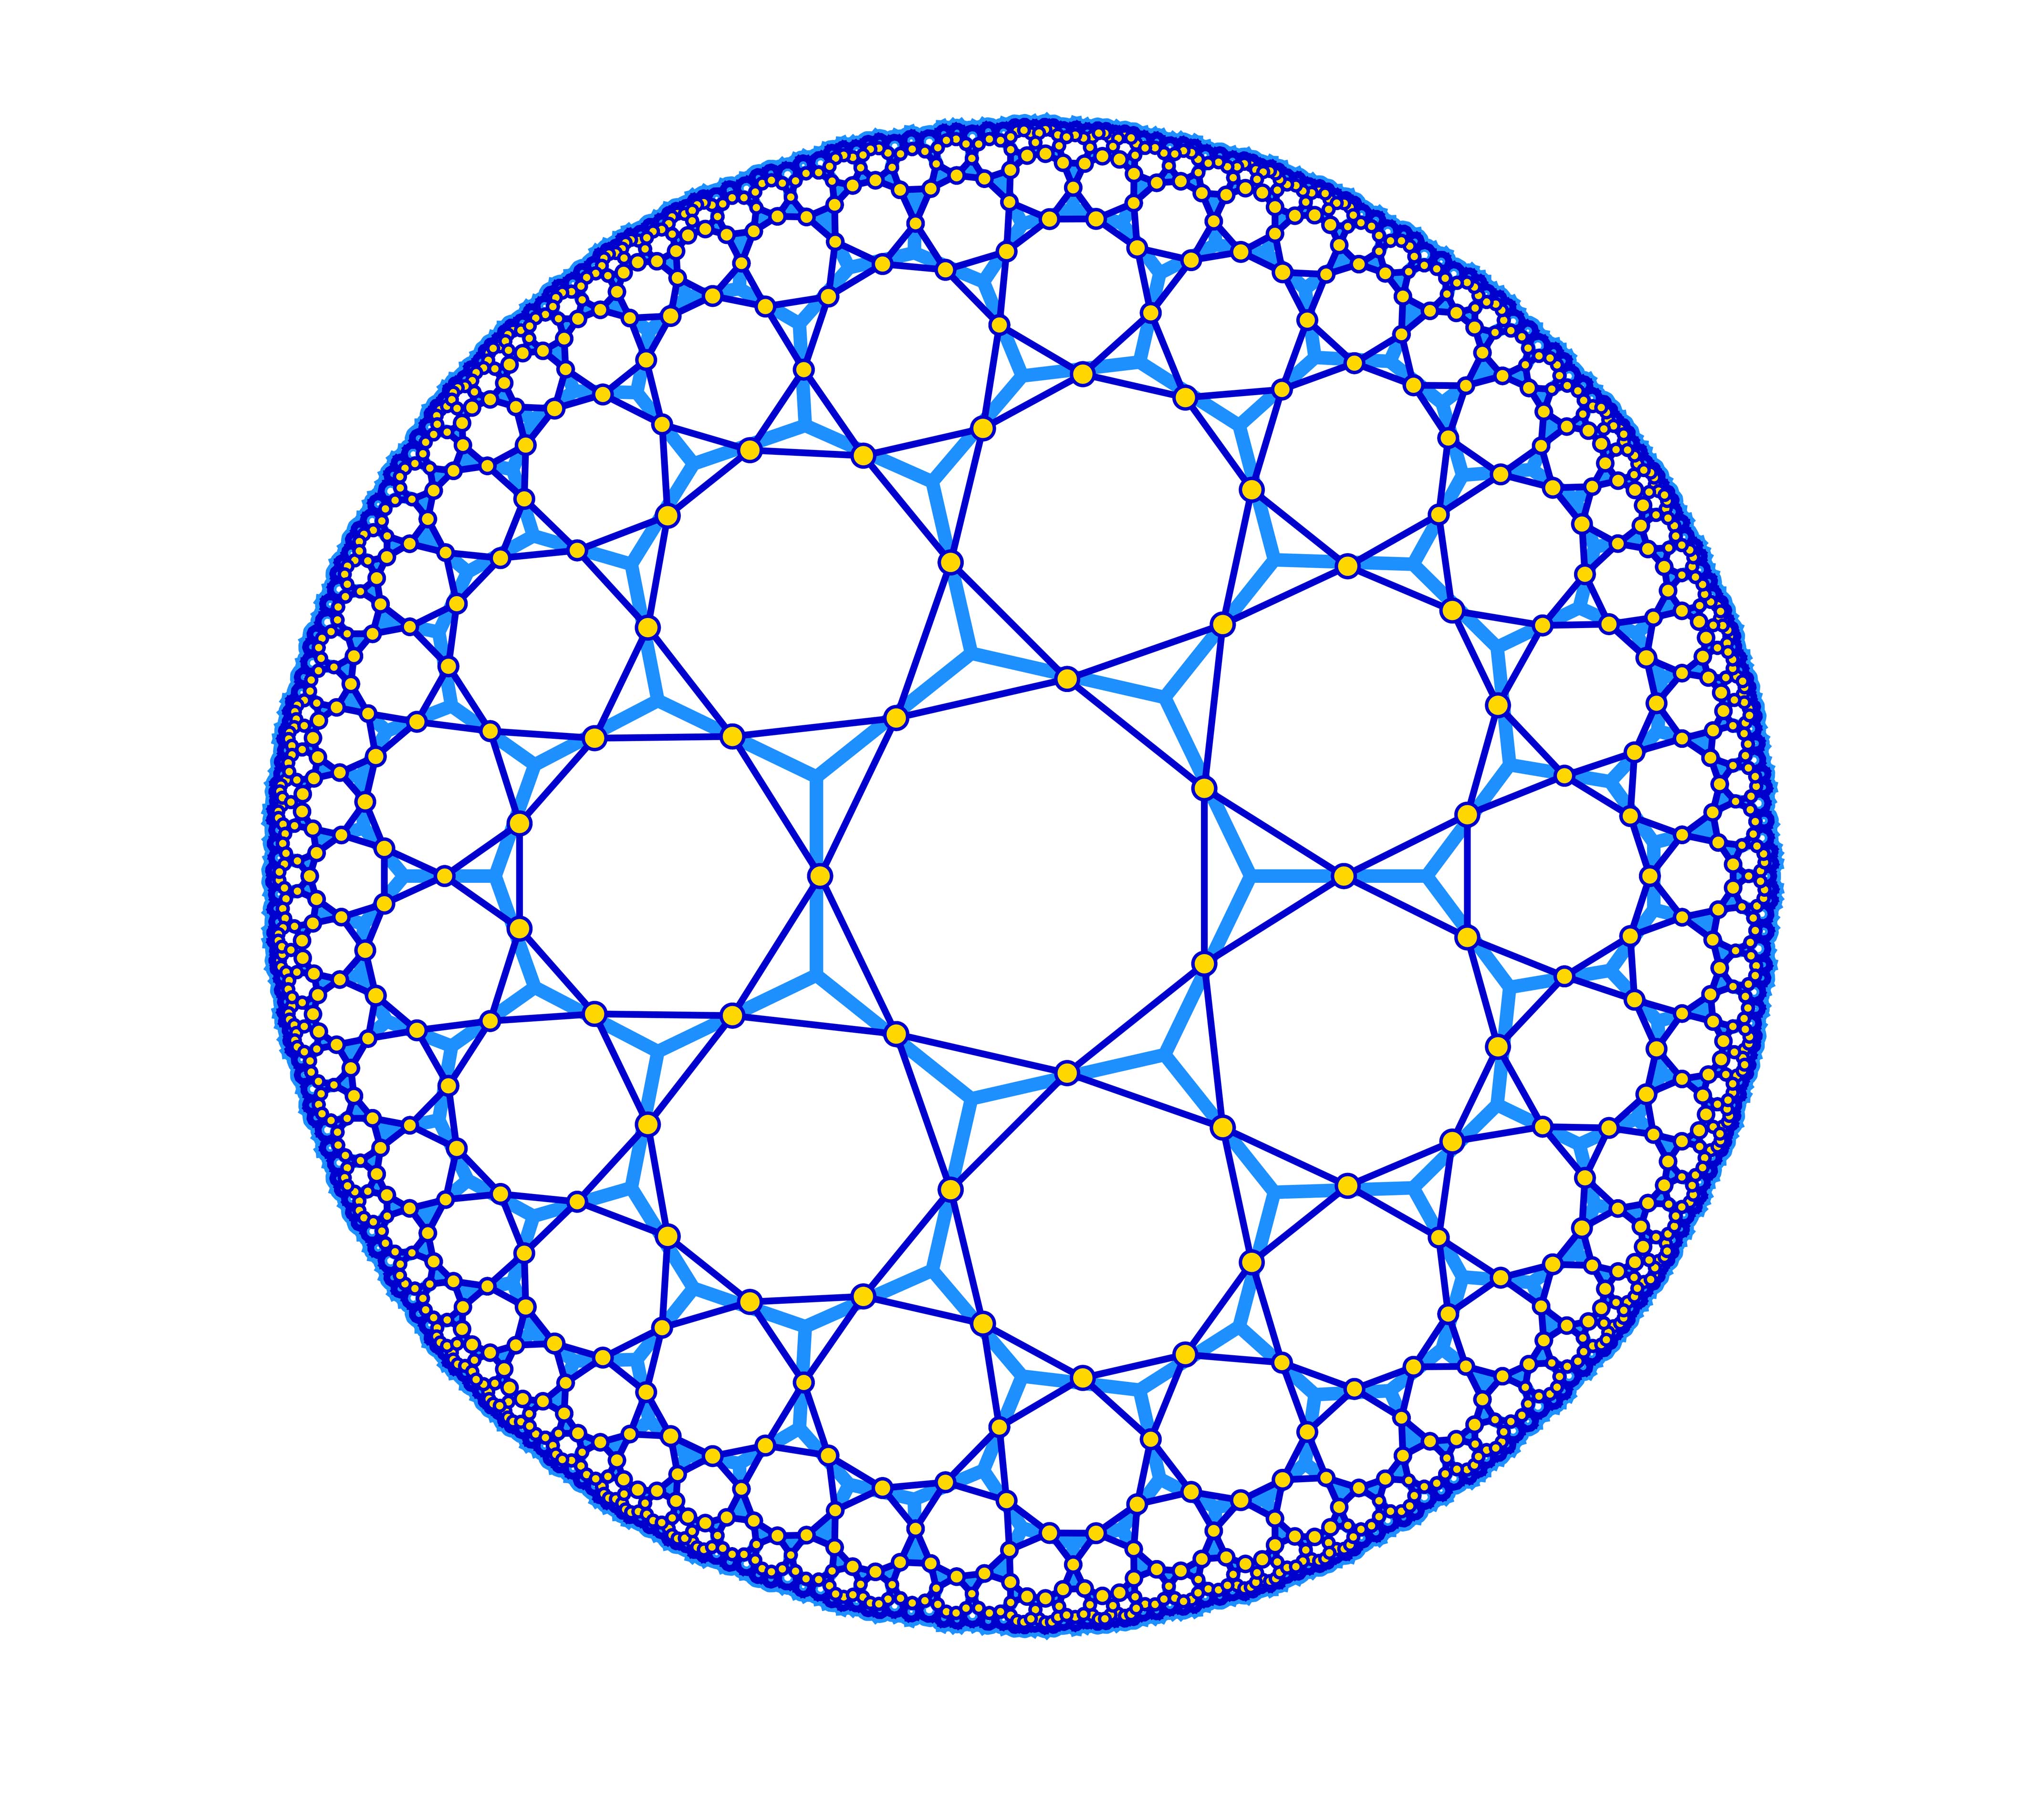 Circular tiling pattern of seven-sided polygons